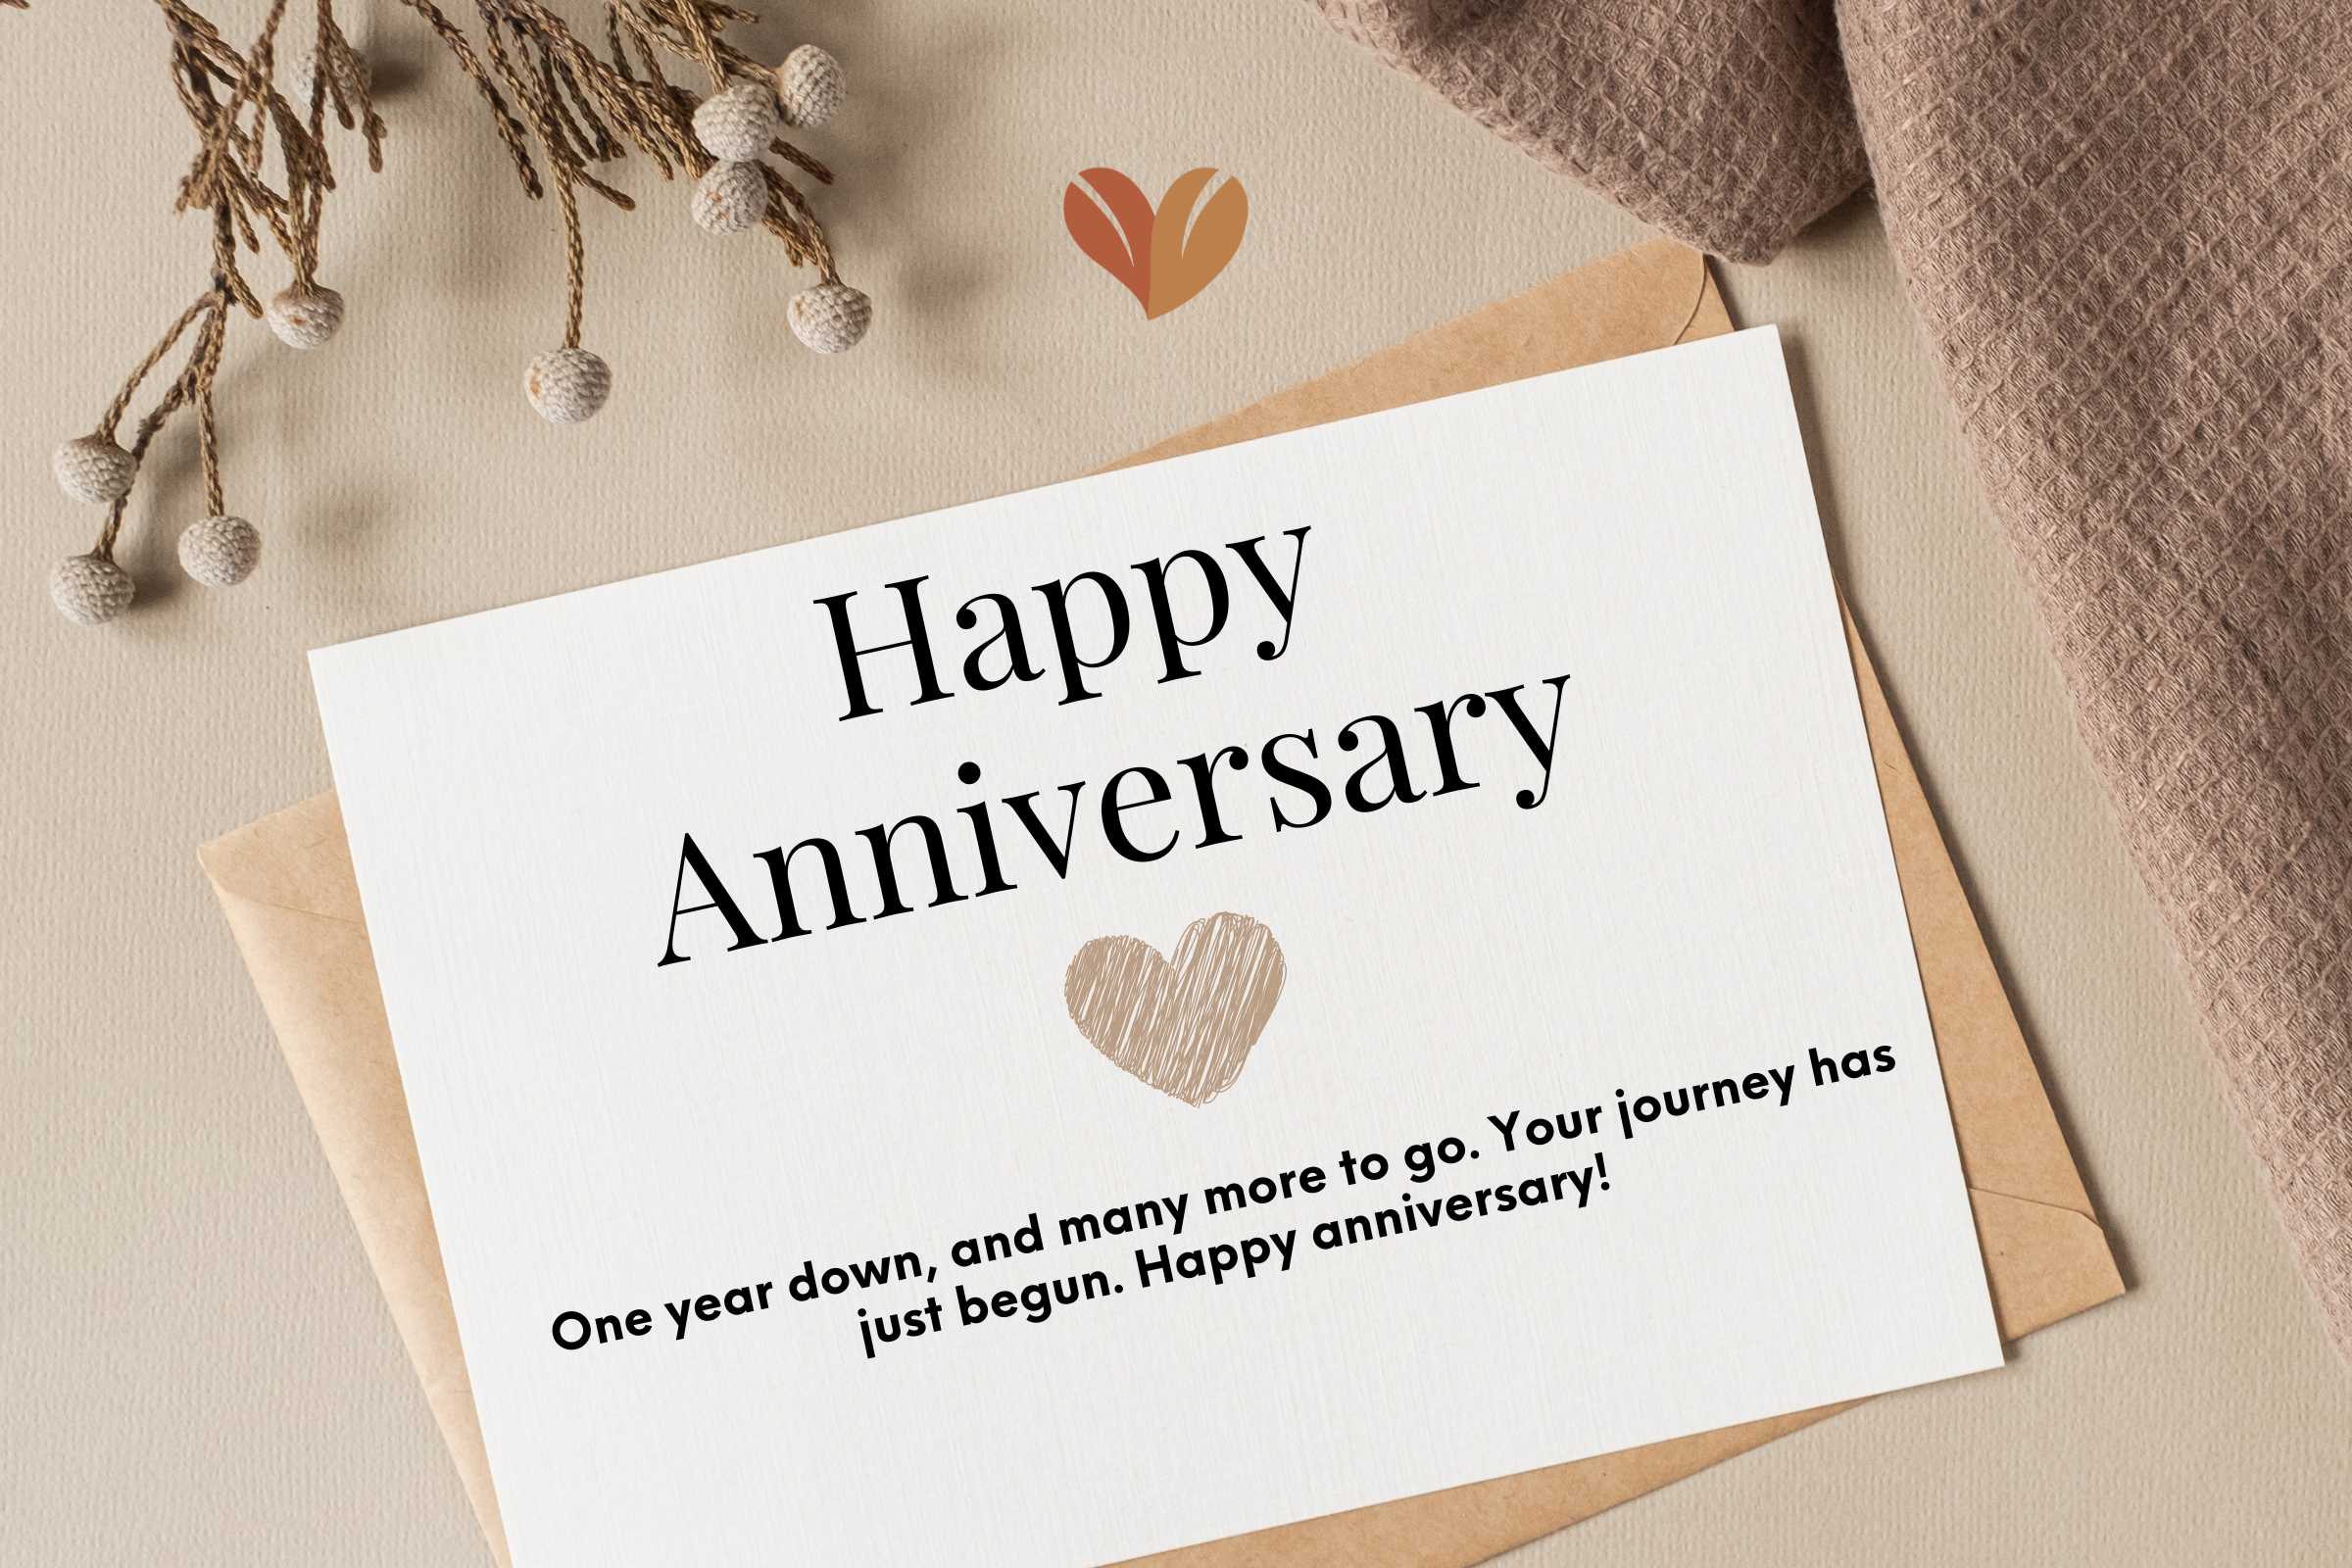 One year down, and many more to go - Love anniversary quotes